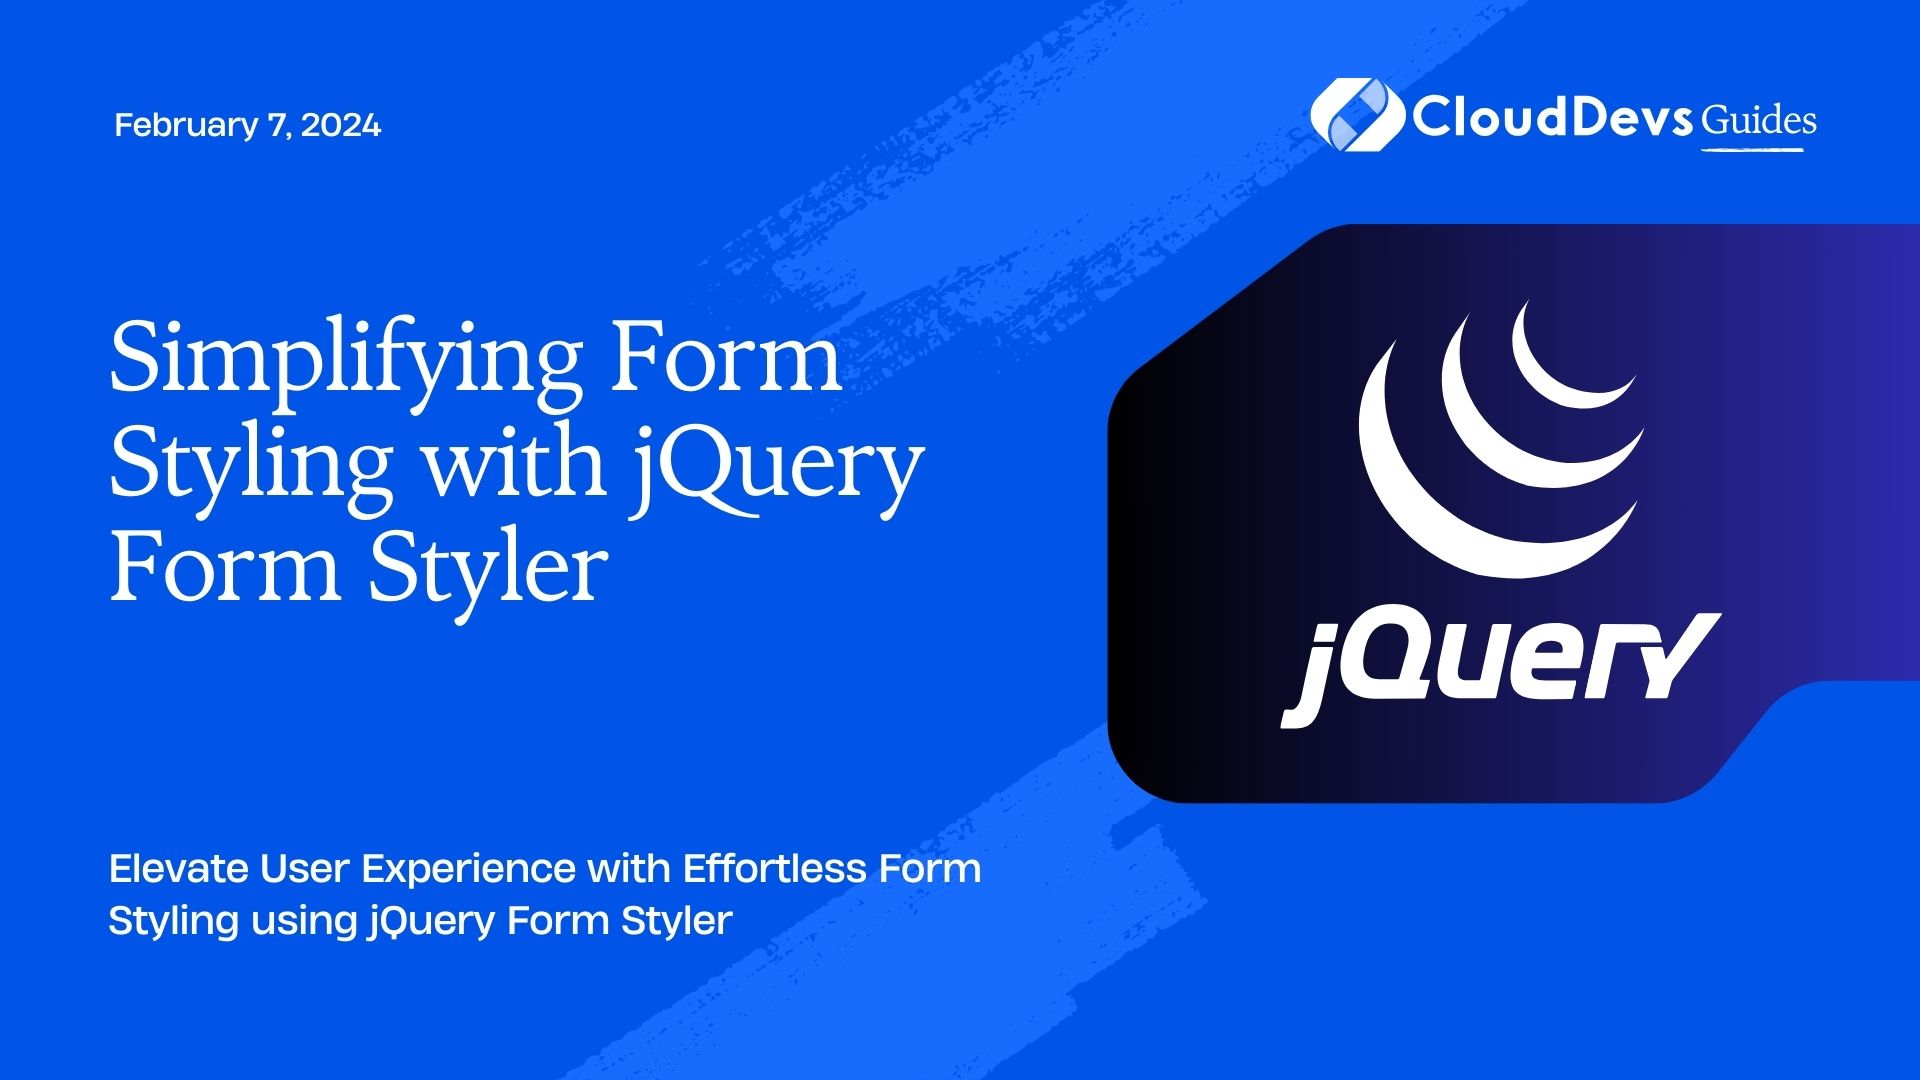 Simplifying Form Styling with jQuery Form Styler